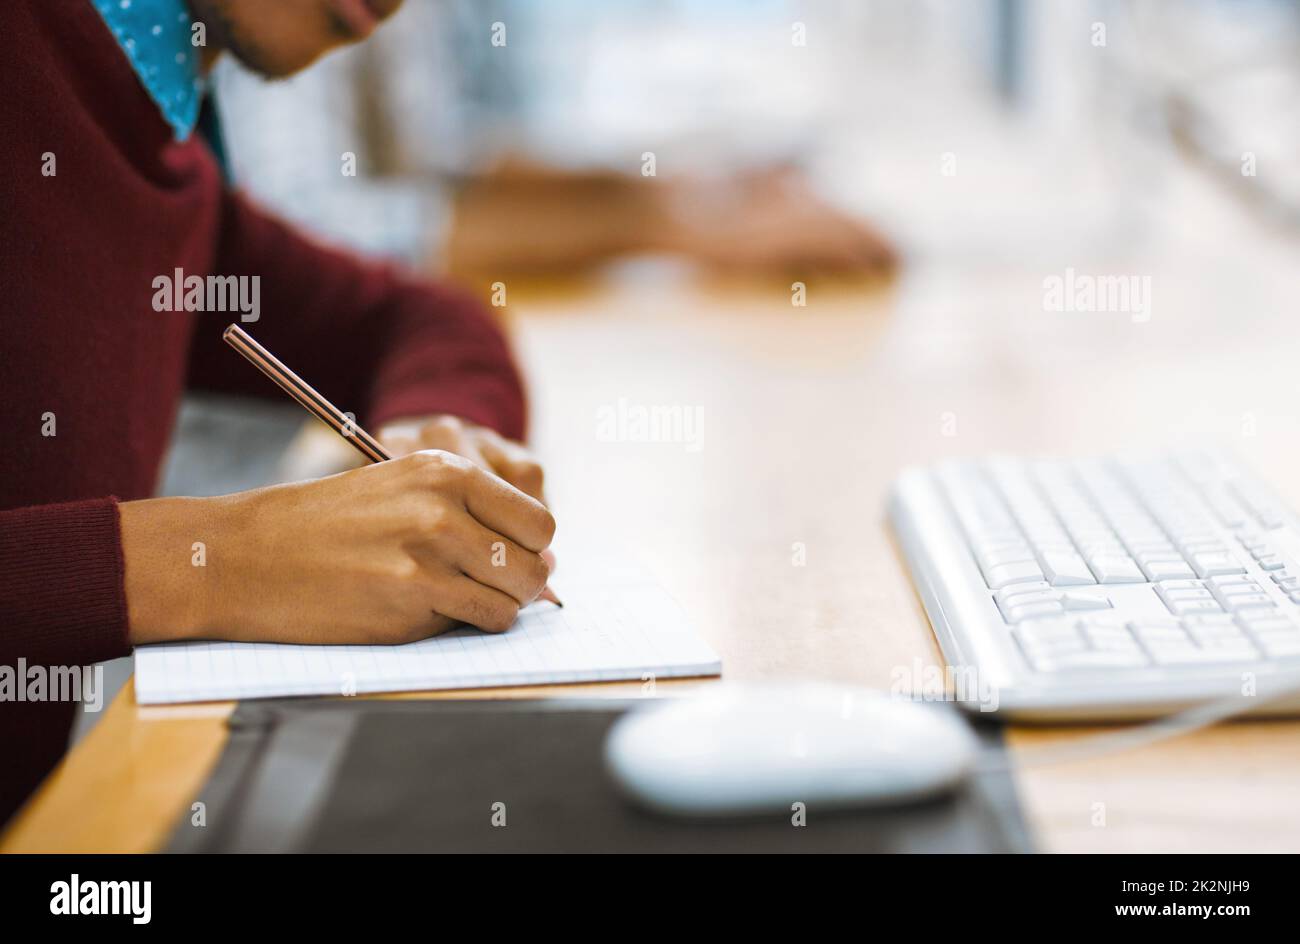 Always make notes when studying. Shot of a unrecognizable student writing down notes while working on a computer in a library. Stock Photo